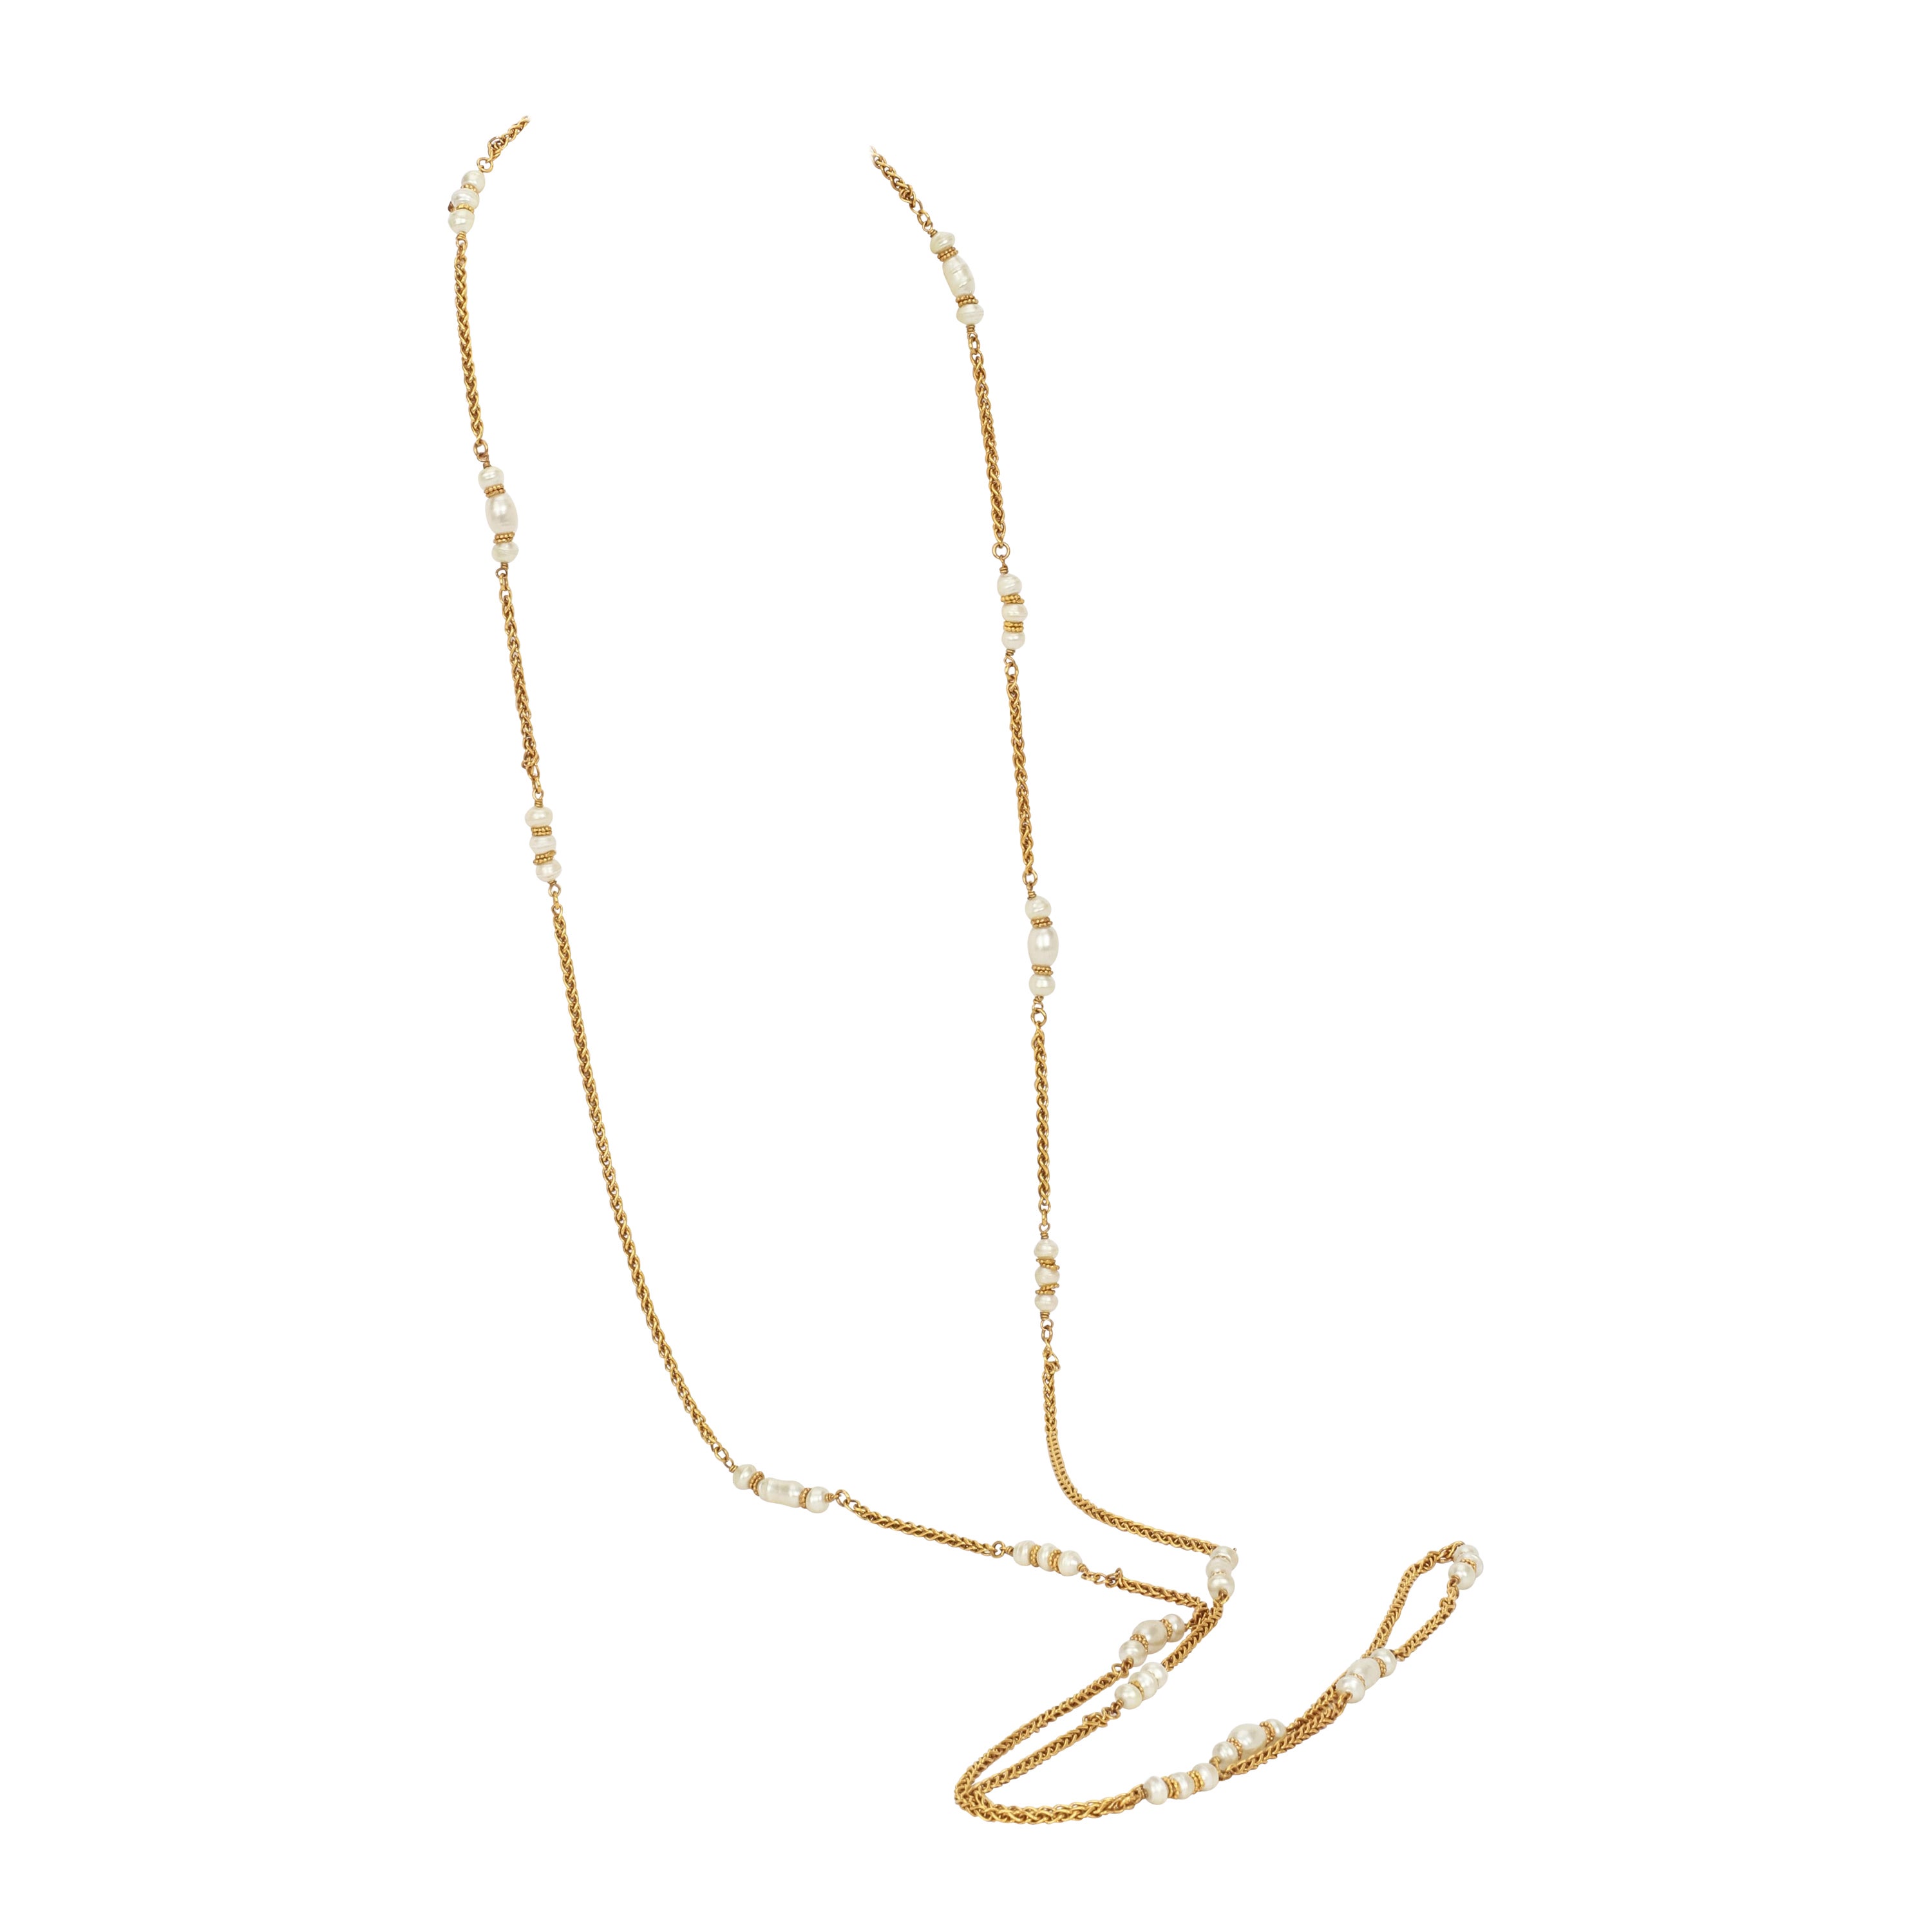 1990's Vintage Chanel Long Sautoir Gold Pearl Chain Necklace